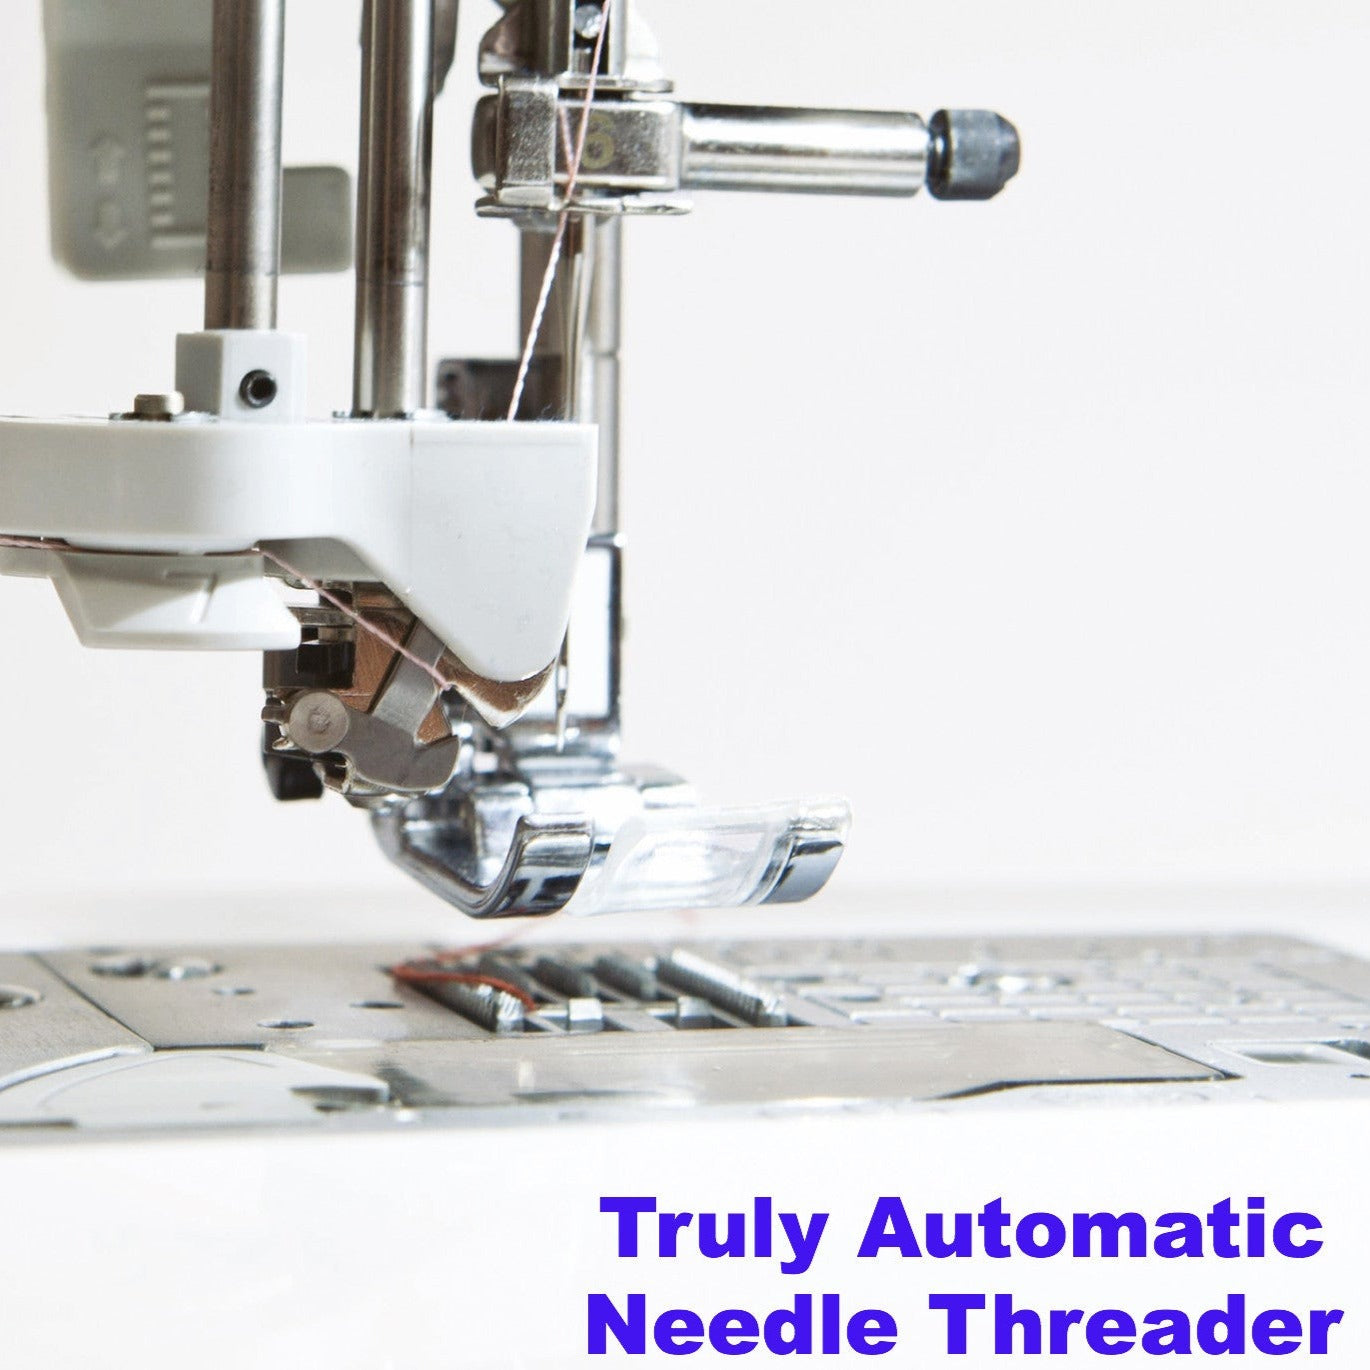 automatic needle threader on Brother Innov-is F420 sewing machine from Jaycotts Sewing Supplies